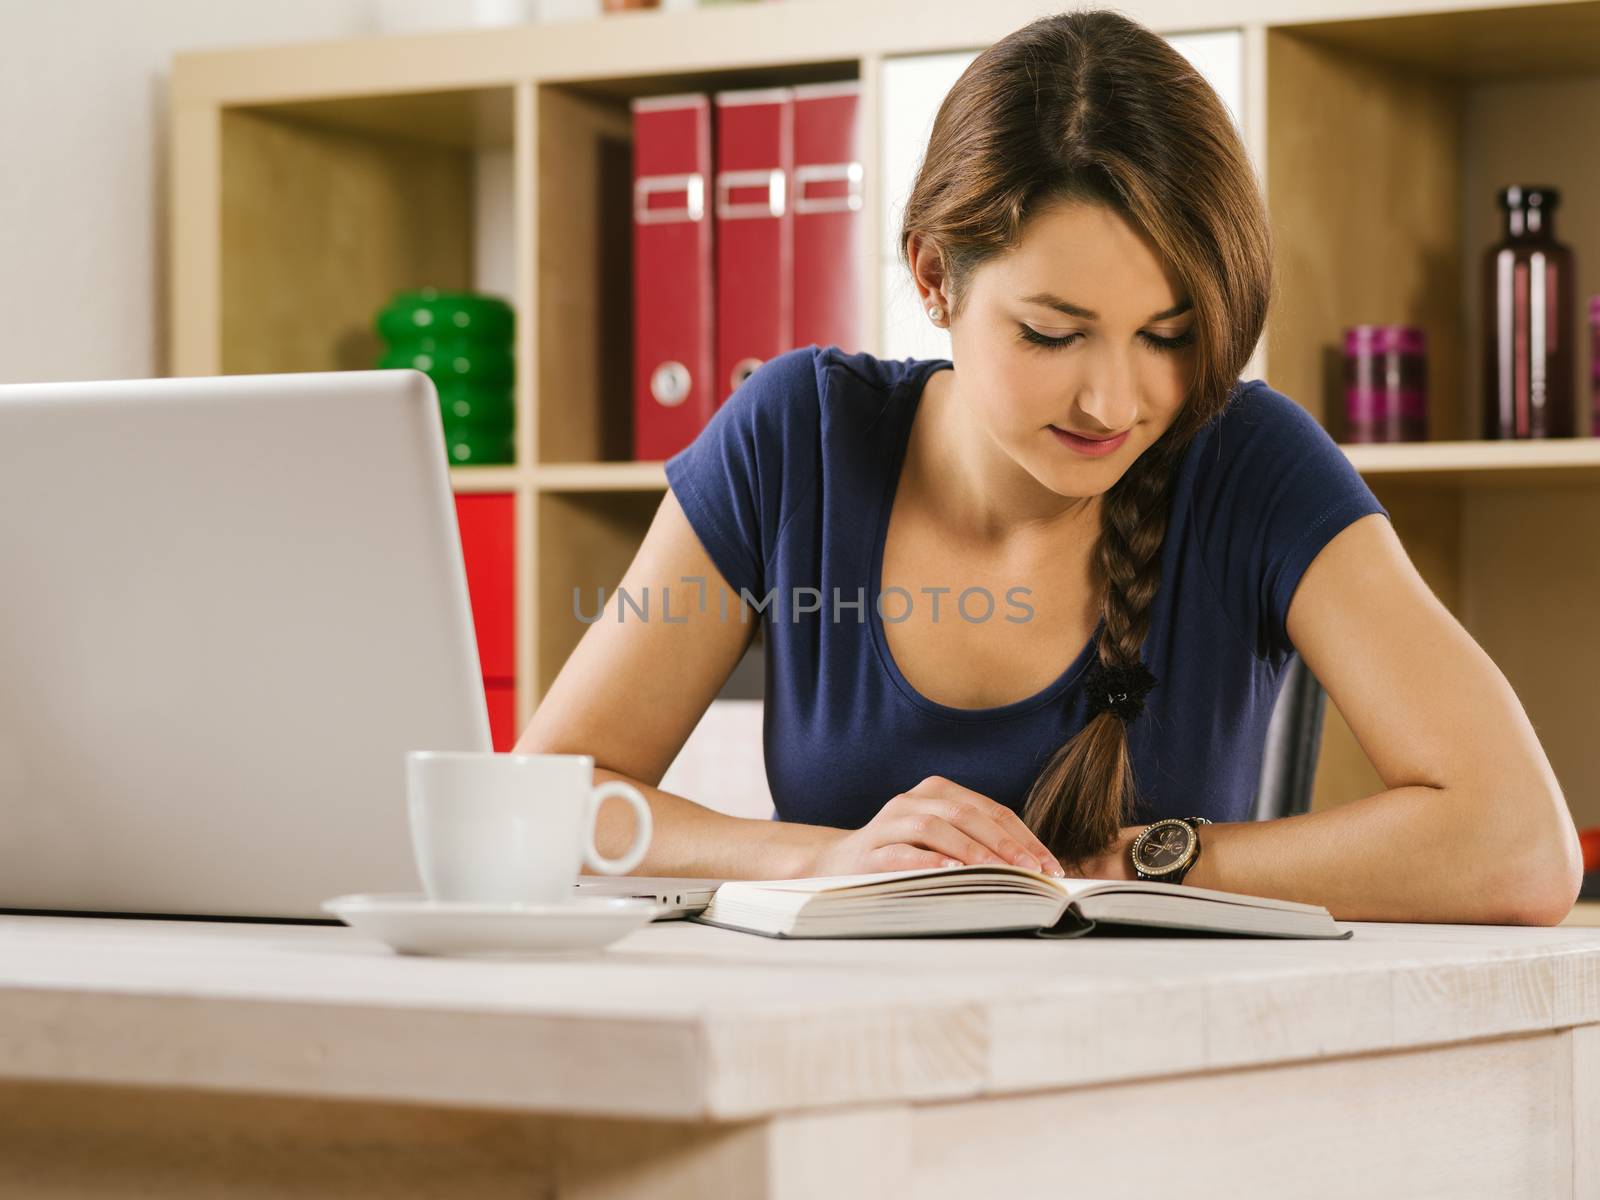 Photo of a beautiful woman using a laptop, drinking coffee, and reading a book at home or an office.